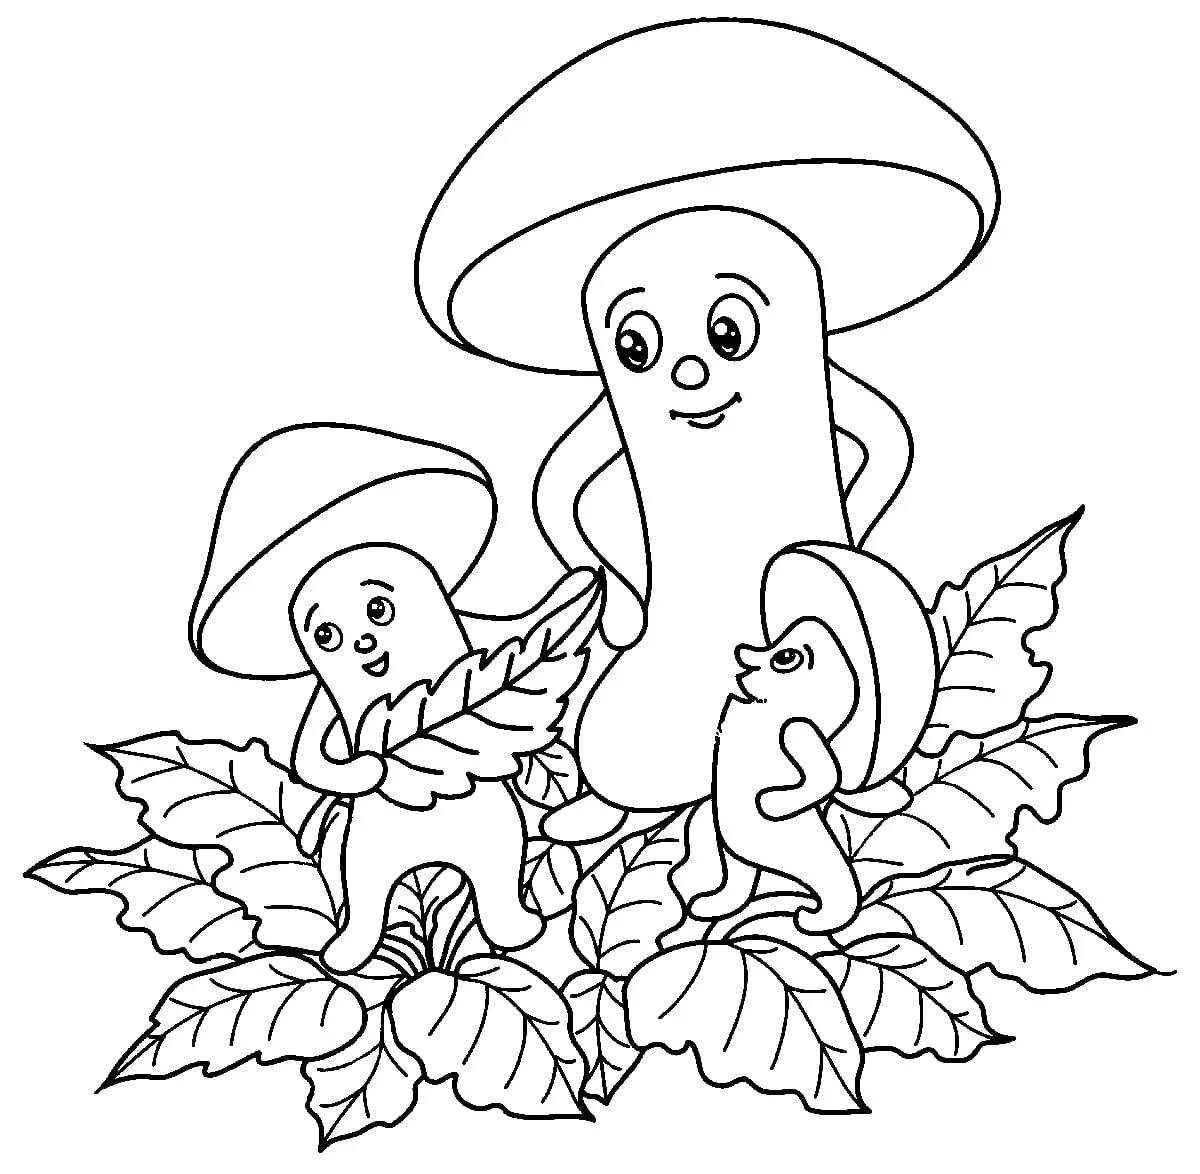 Outstanding mushroom coloring page for 6-7 year olds